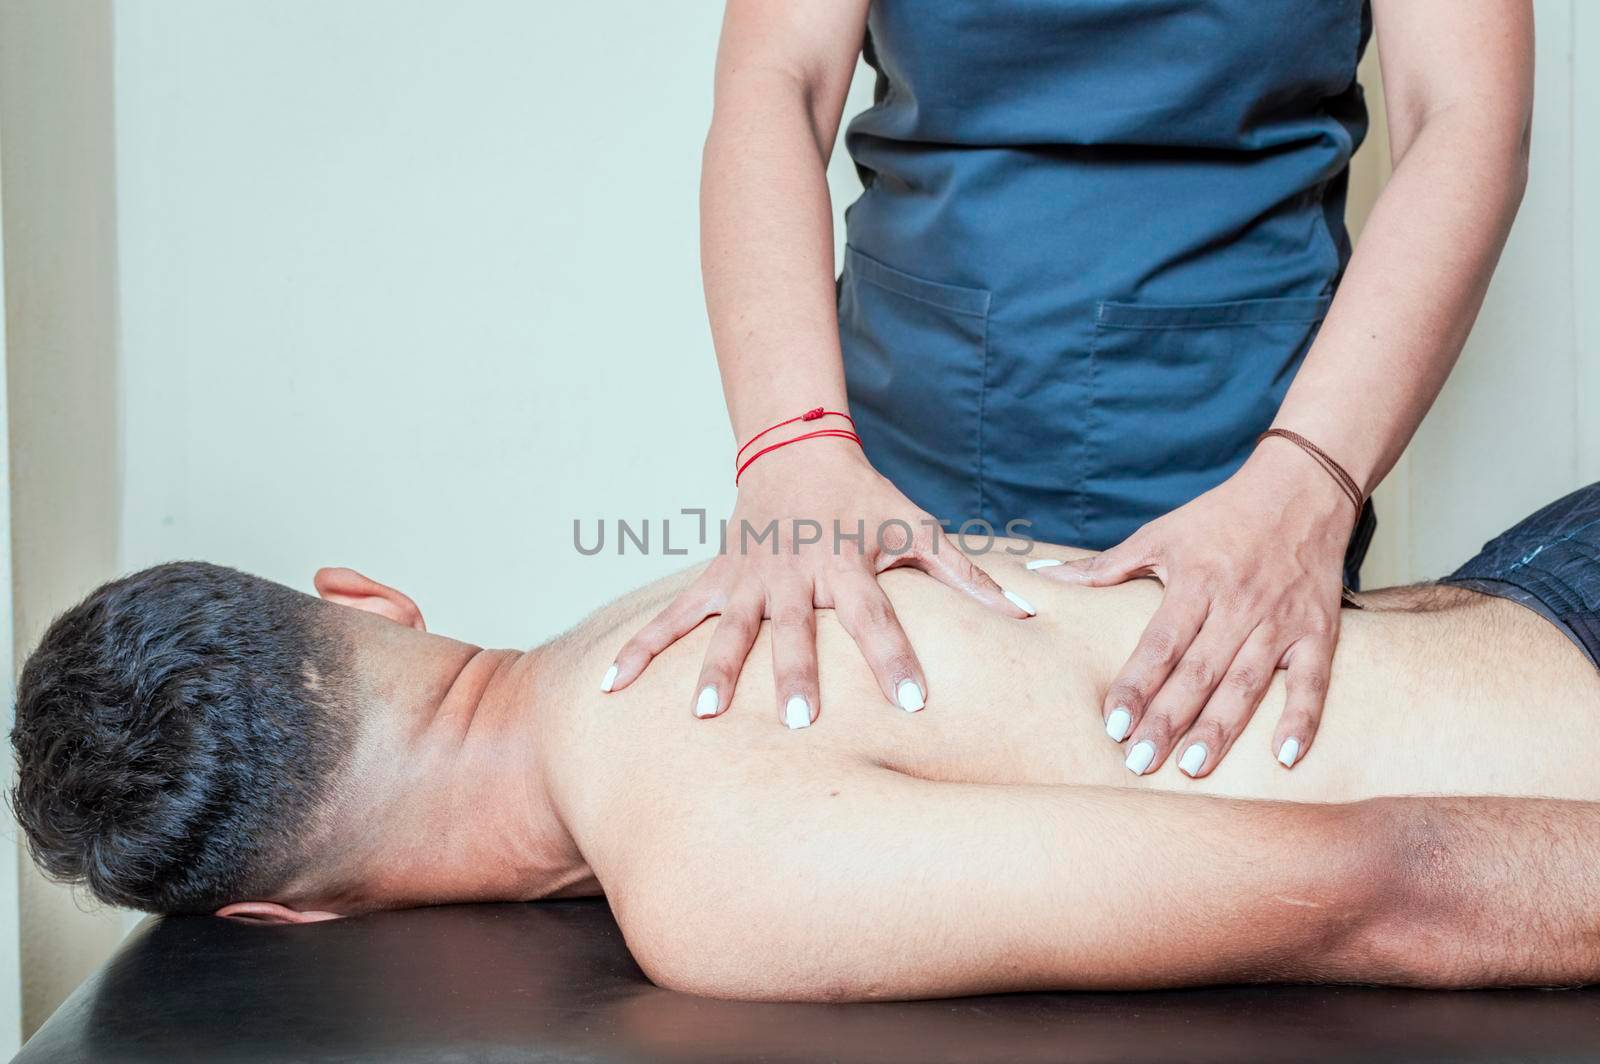 man having chiropractic back adjustment. physiotherapist curing patient's spine problems, Rehabilitation of sports injuries.